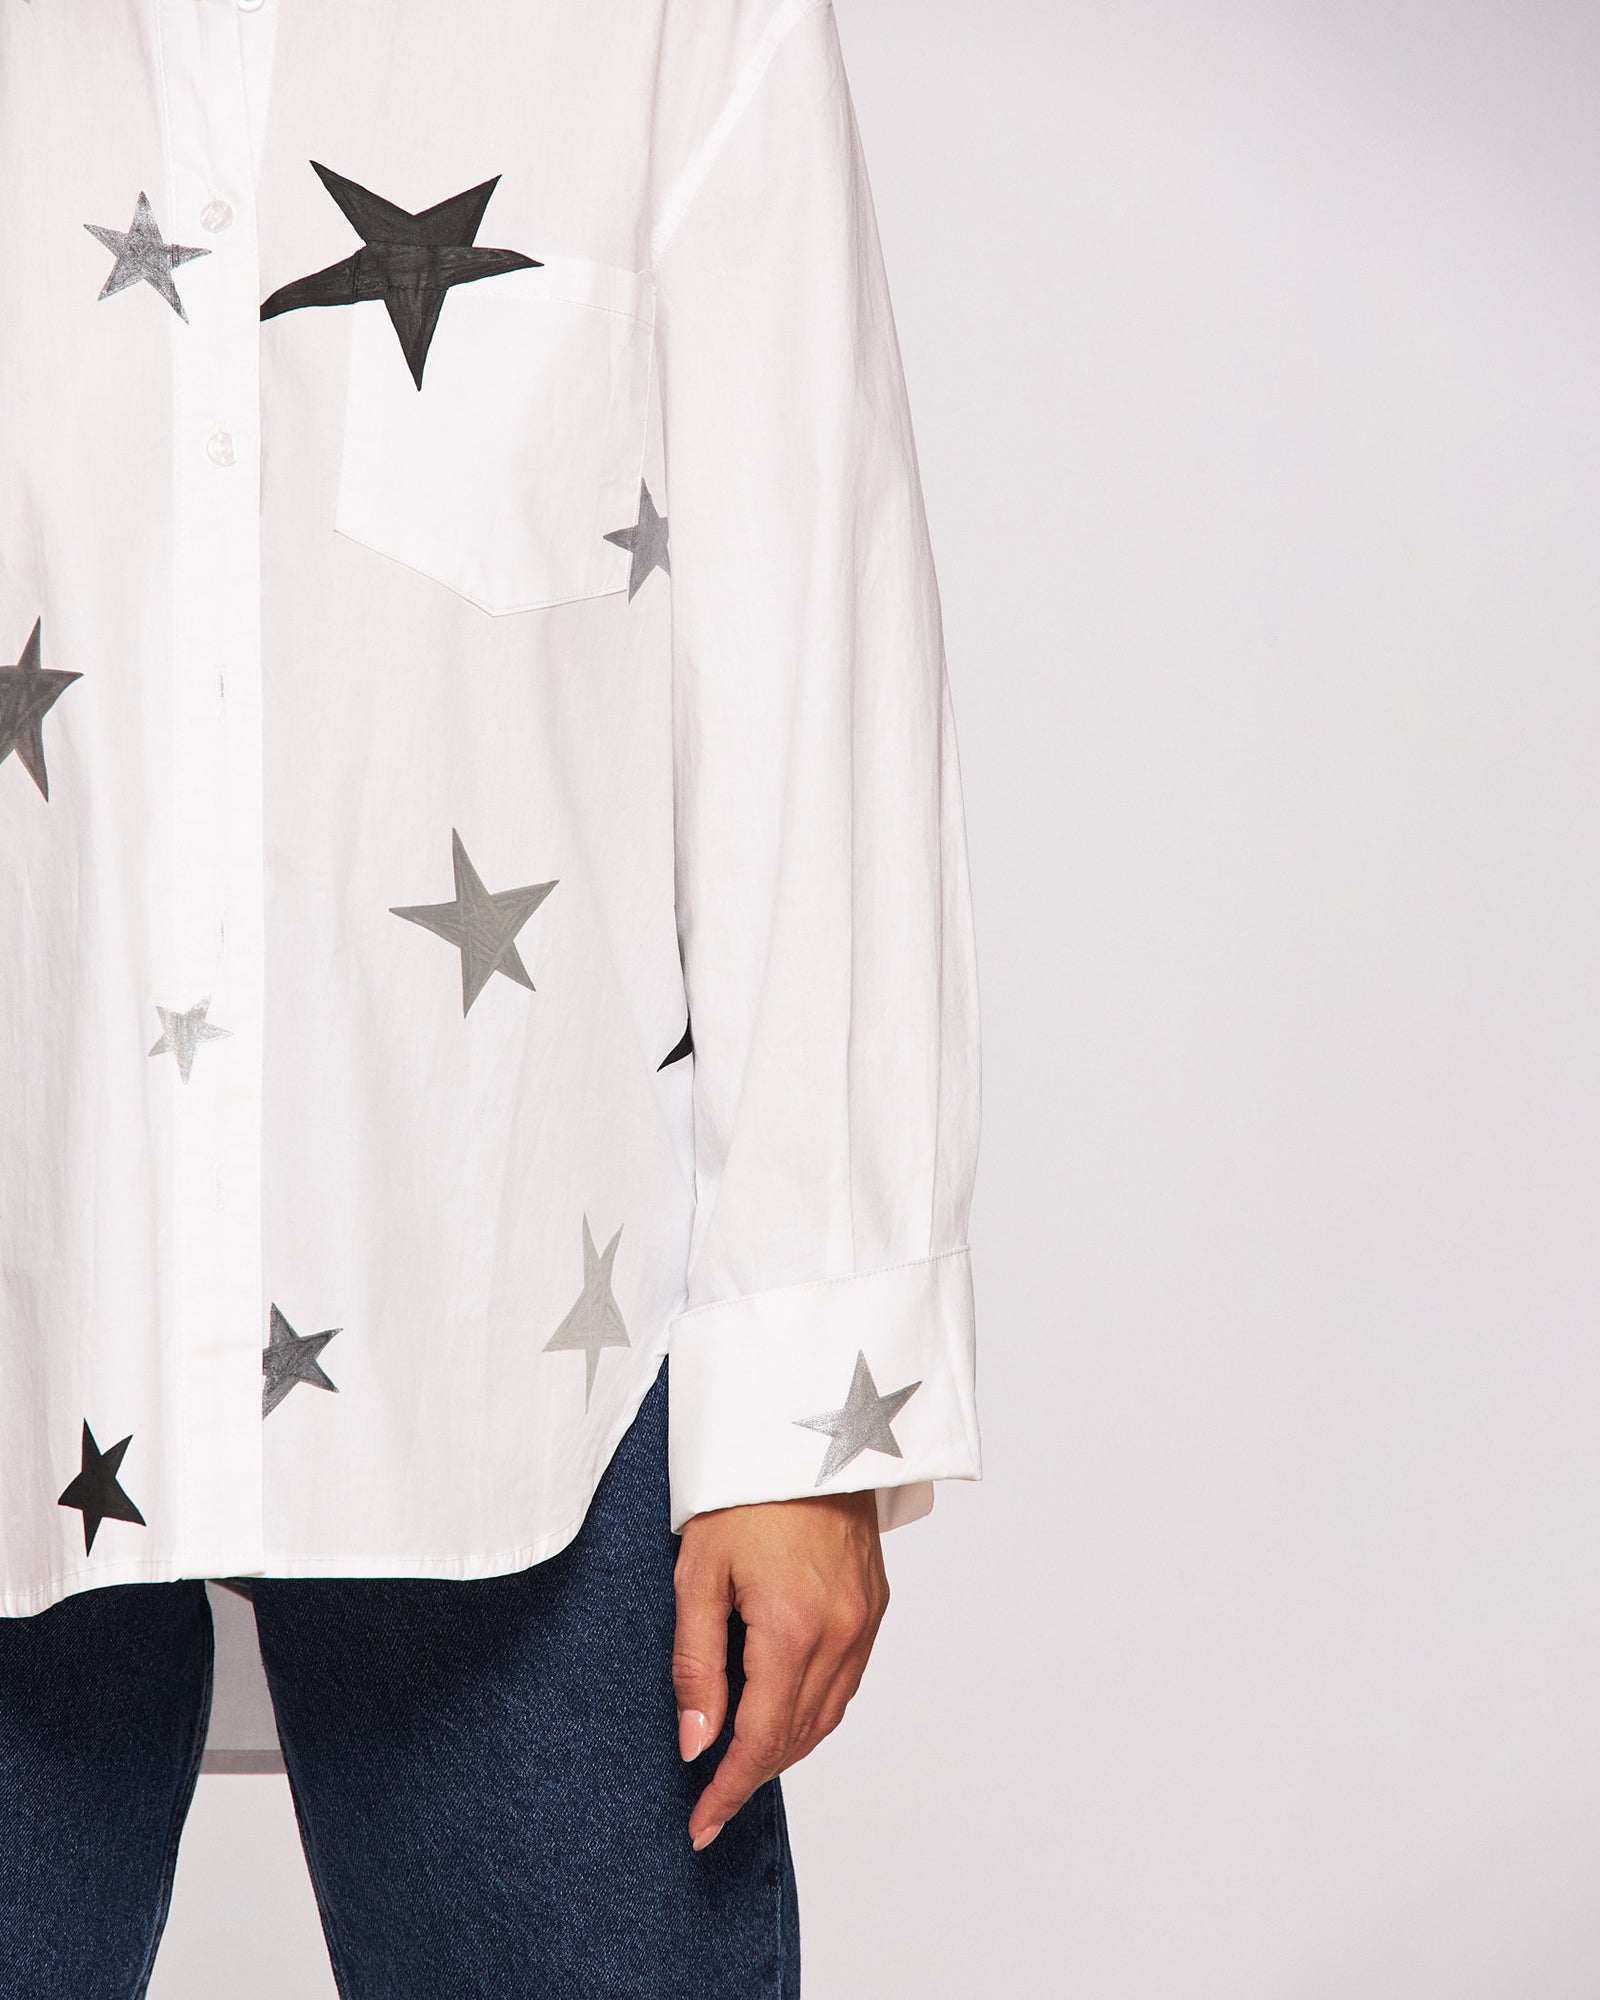 "It's written in the stars" hand painted shirt